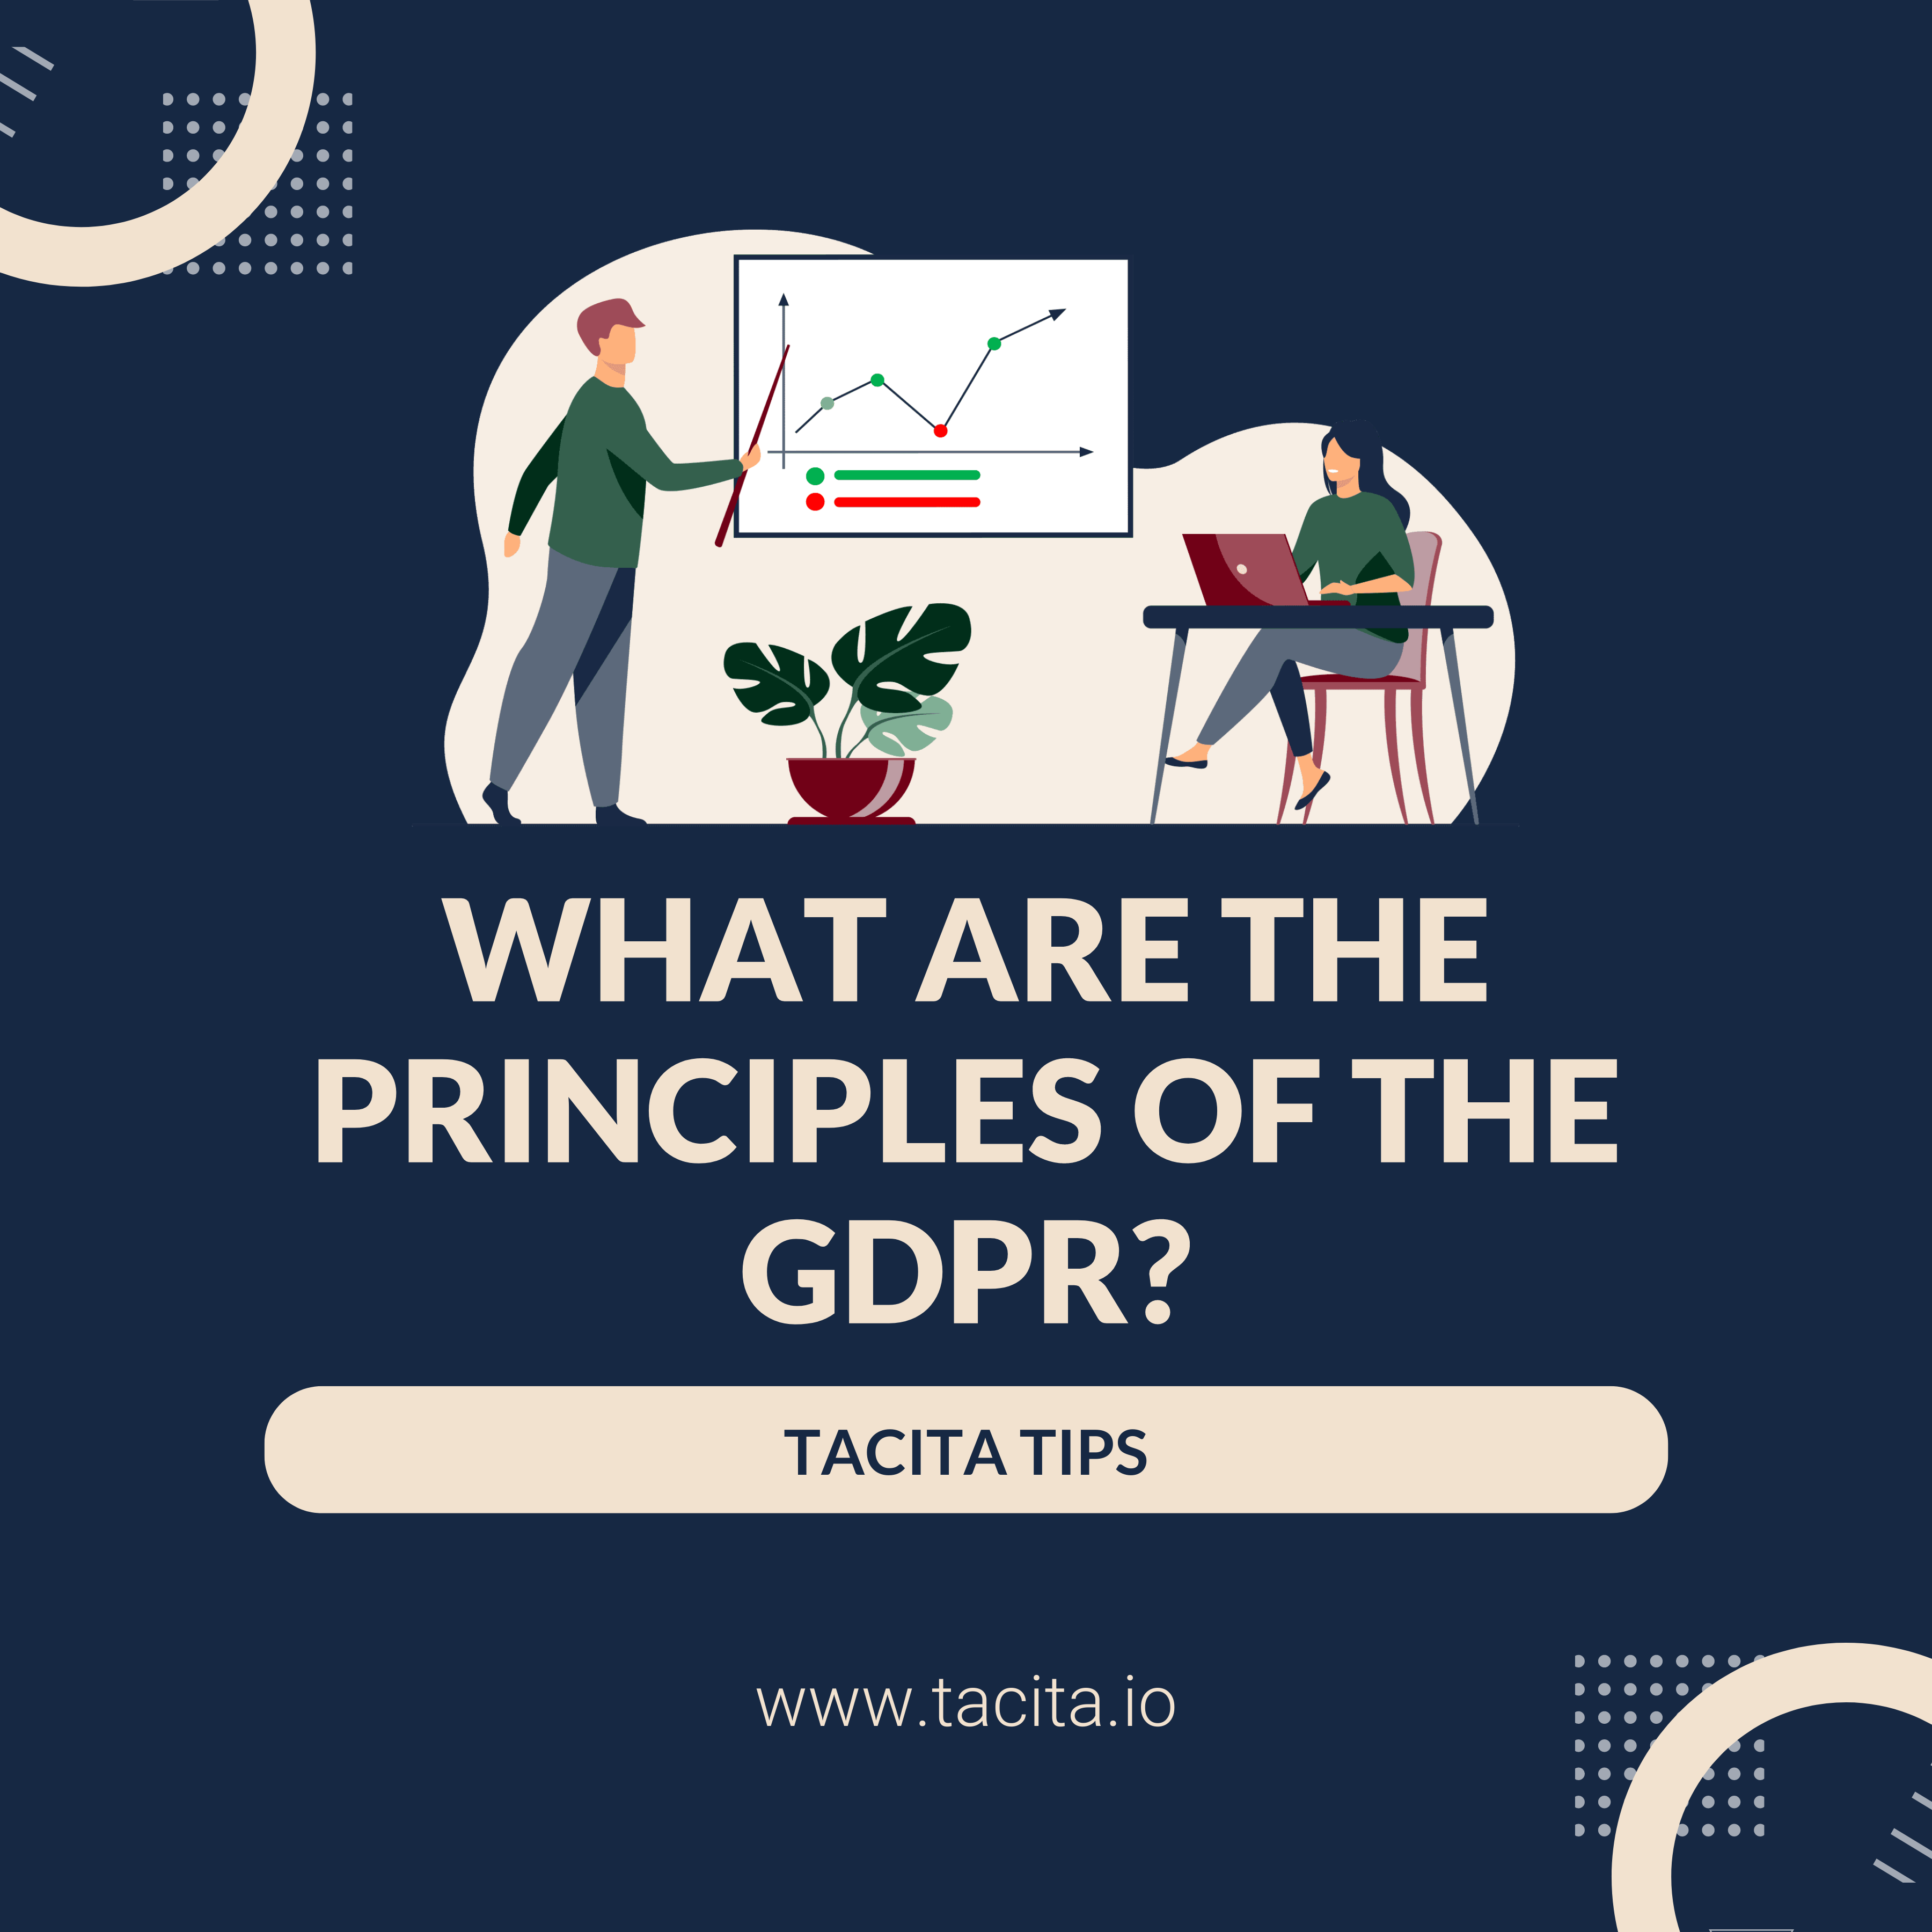 Principles of the GDPR